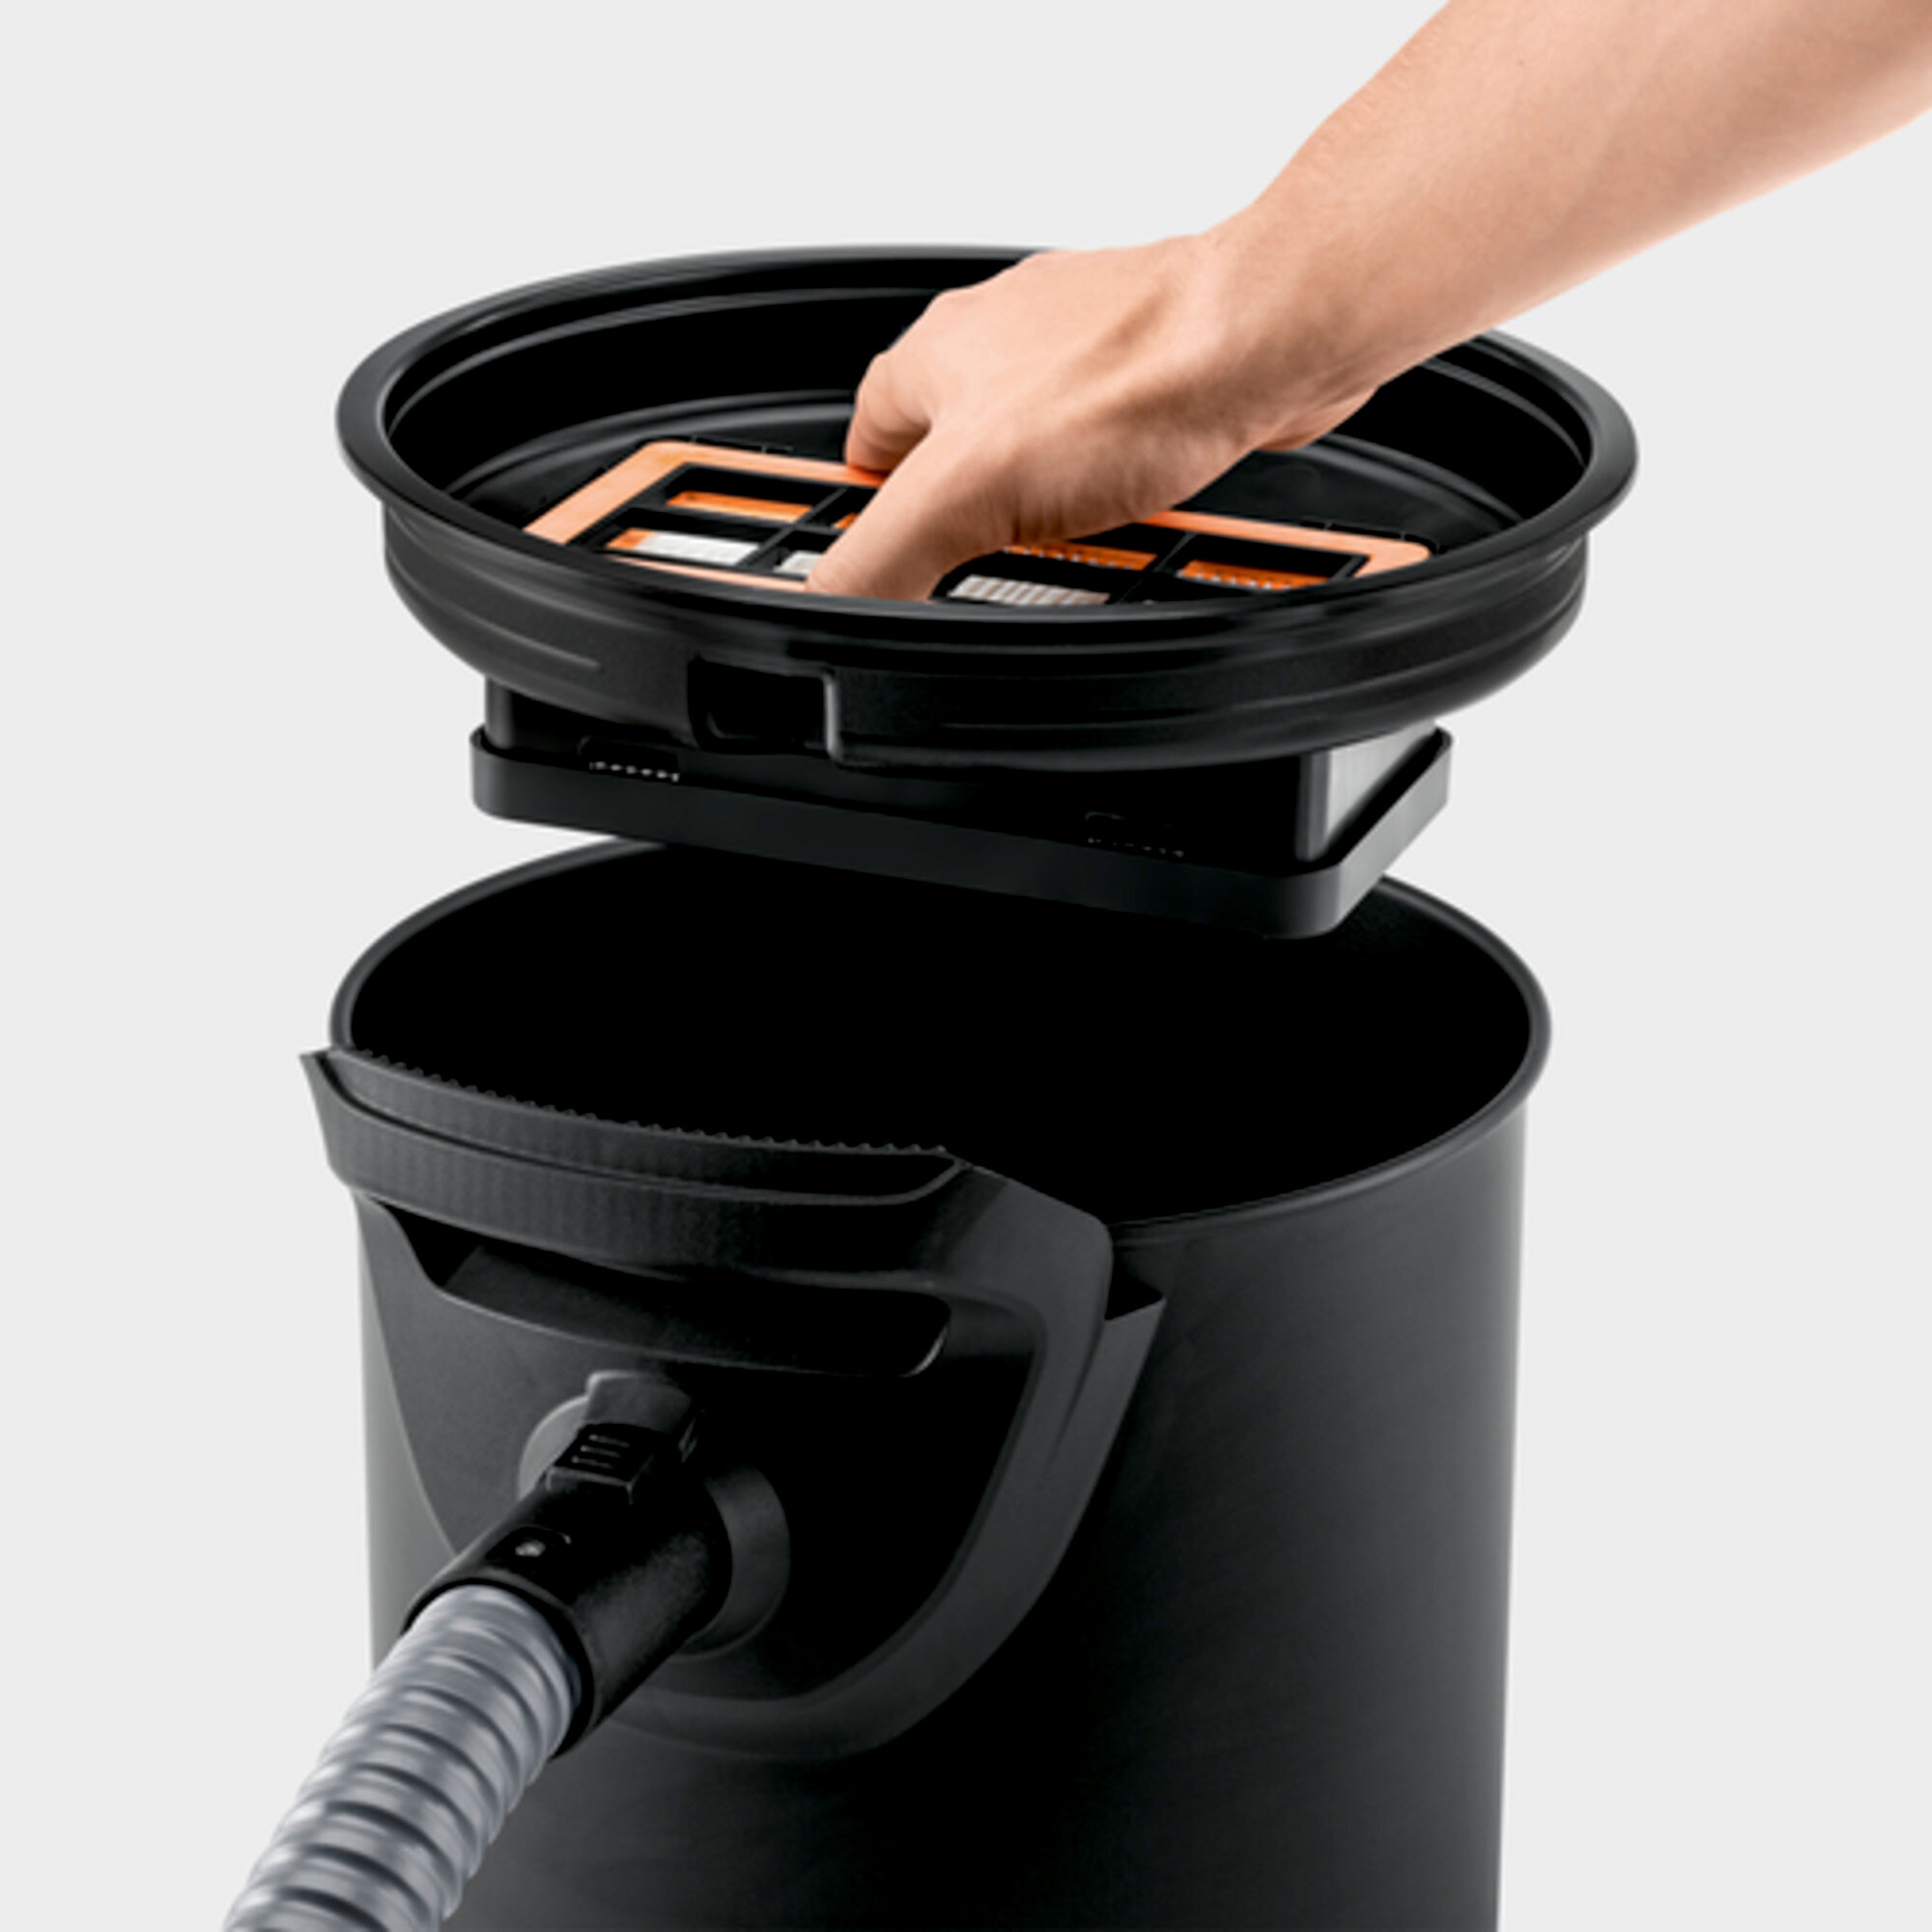 Ash and dry vacuum cleaner AD 2: Single-part filter system (flame-resistant) with robust flat pleated filter and metal coarse dirt filter